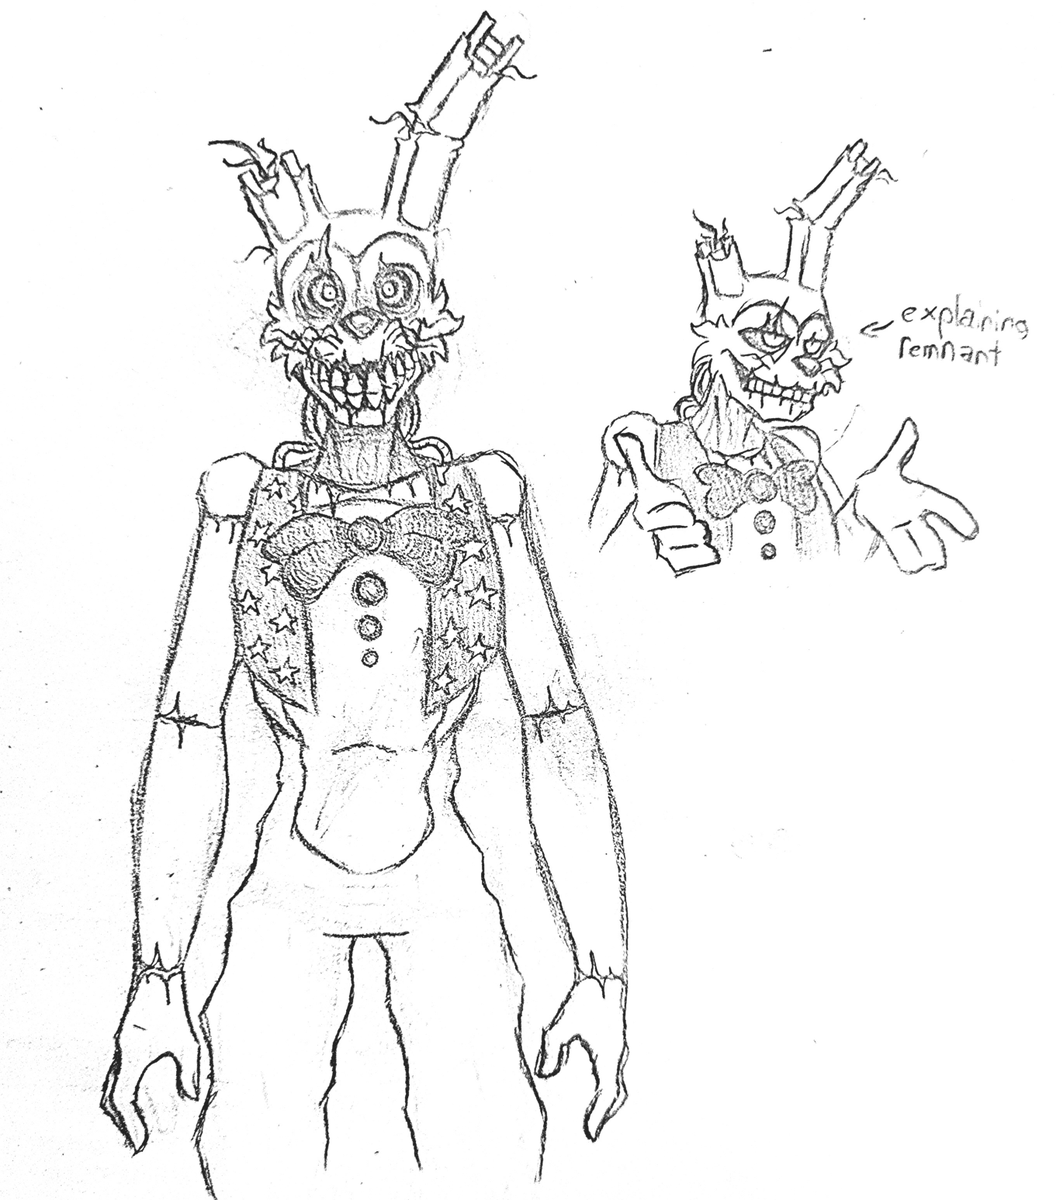 Springtrap fan-design

this thing's around over a year old but i never posted it publicly, so here it is lol

#fnaf #fnafart #springtrap #fnaf3 #Williamafton #Afton